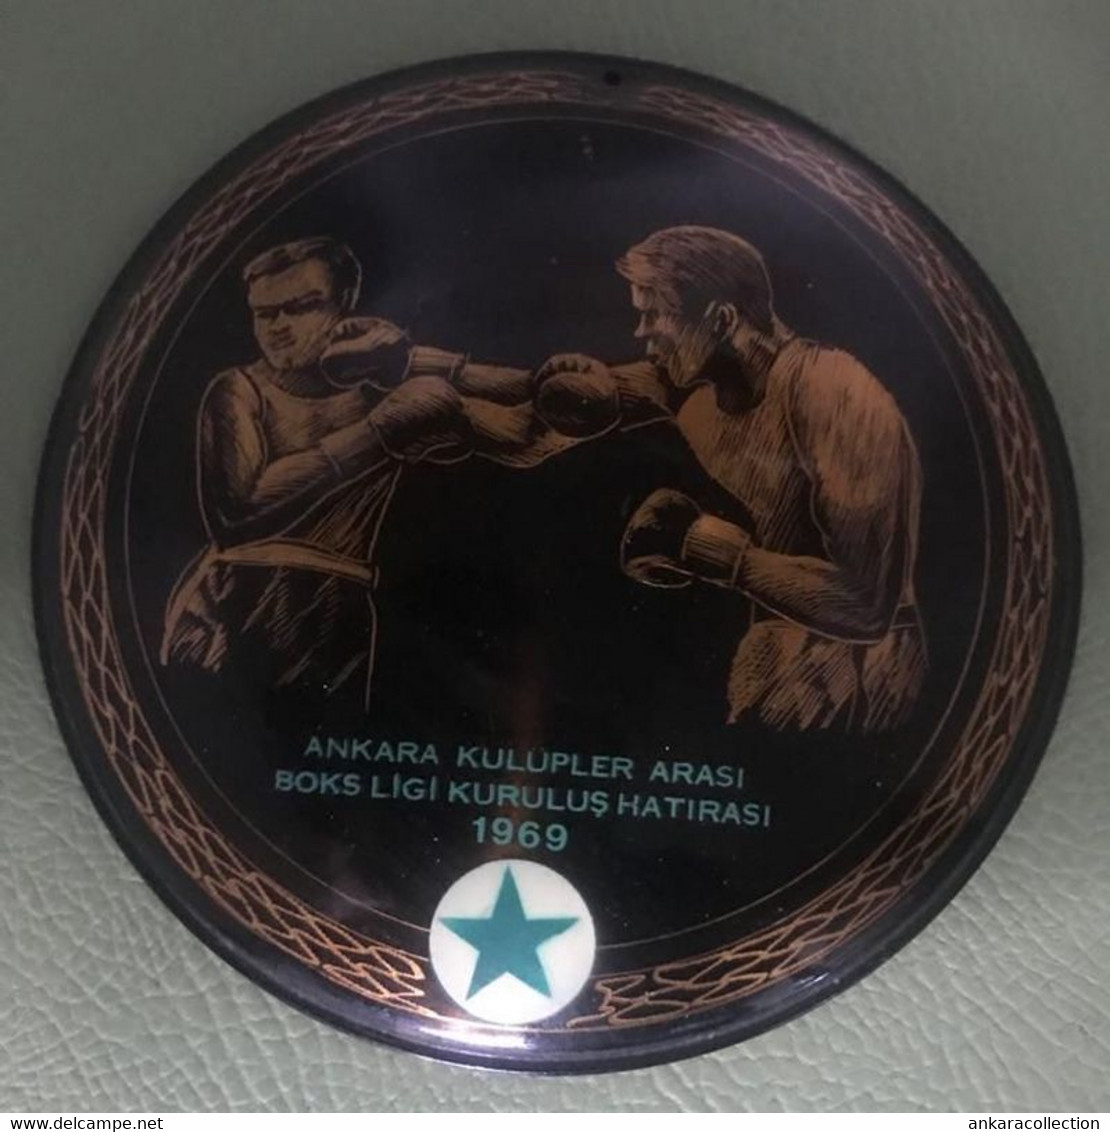 AC - INAUGURATION OF ANKARA INTERCLUB BOXING LEAGUE 1969 VINTAGE COPPER PLATE - Apparel, Souvenirs & Other